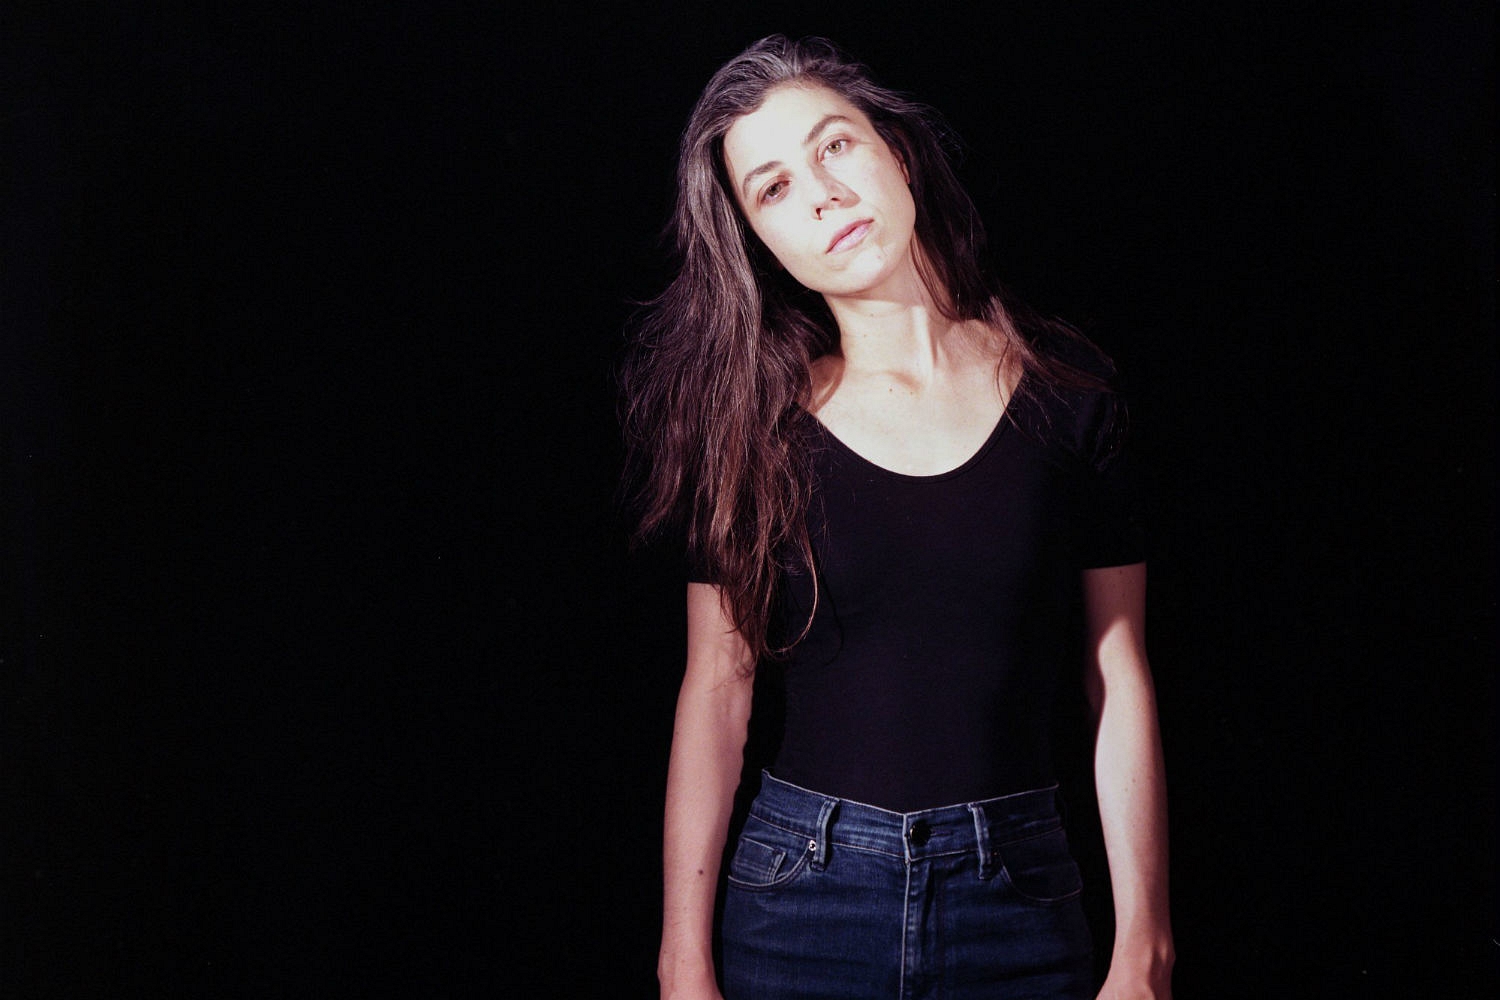 Julia Holter announces new album ‘Aviary’; shares first track ‘I Shall Love 2’